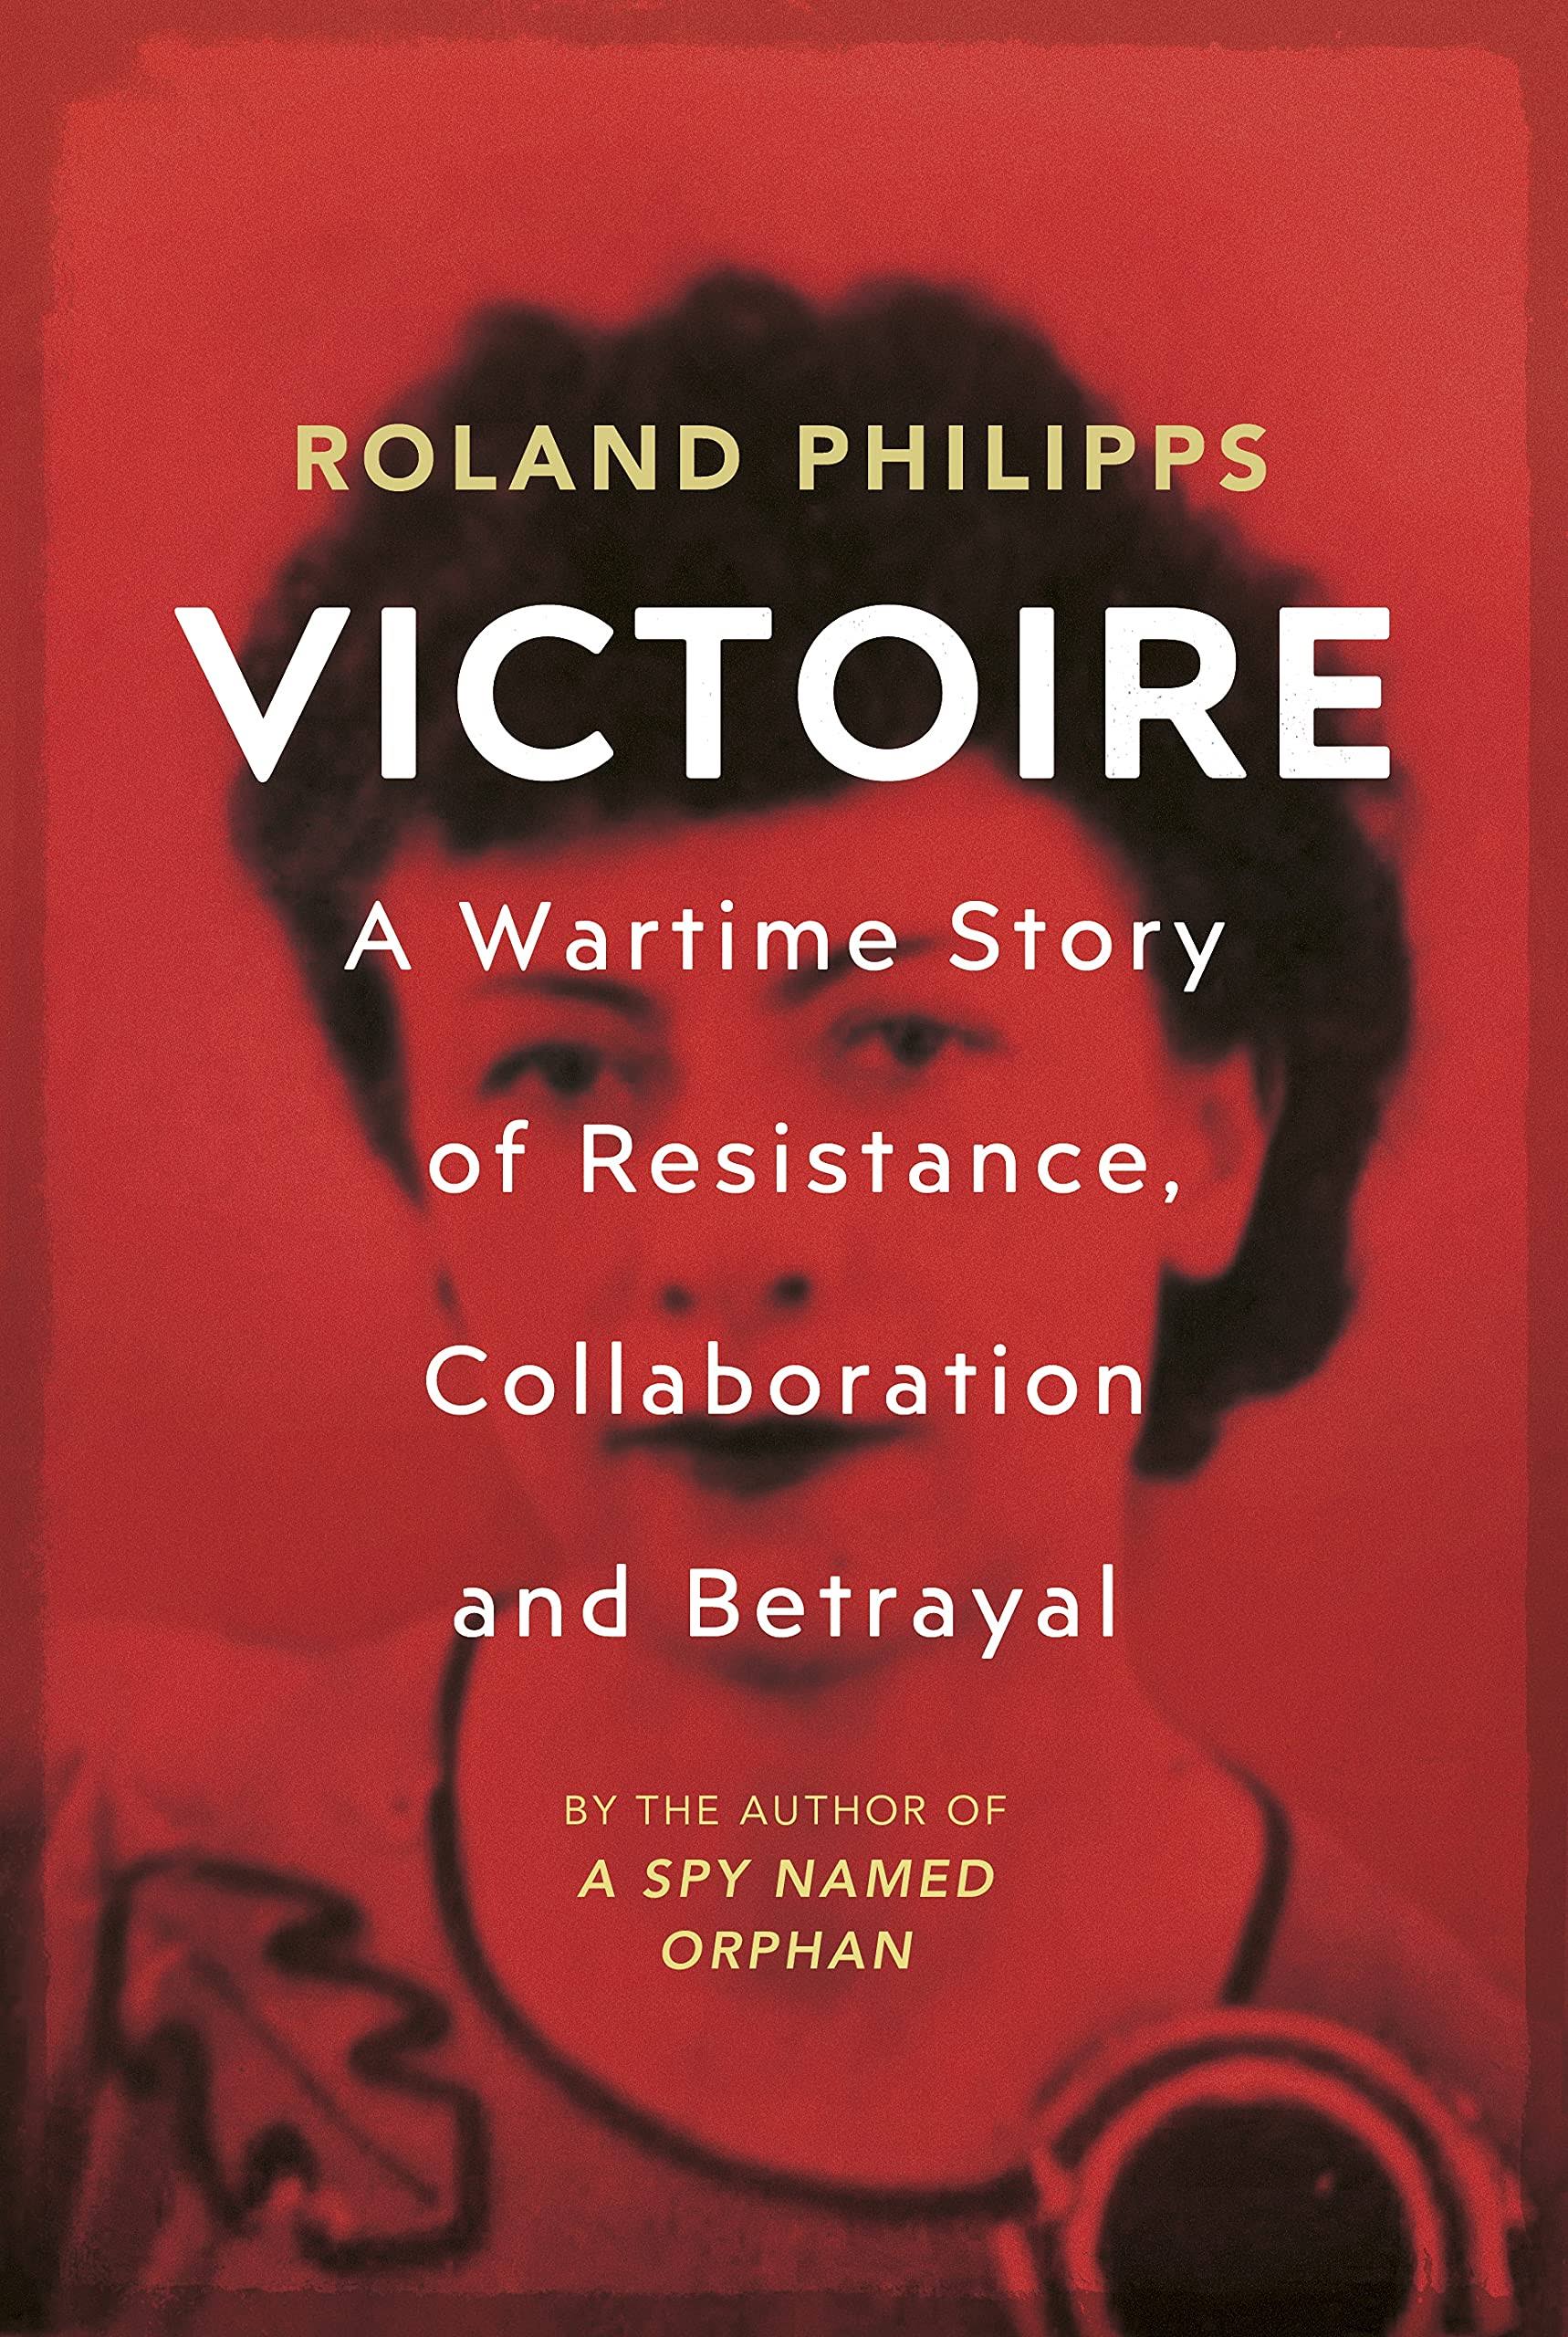 Victoire by Roland Philipps